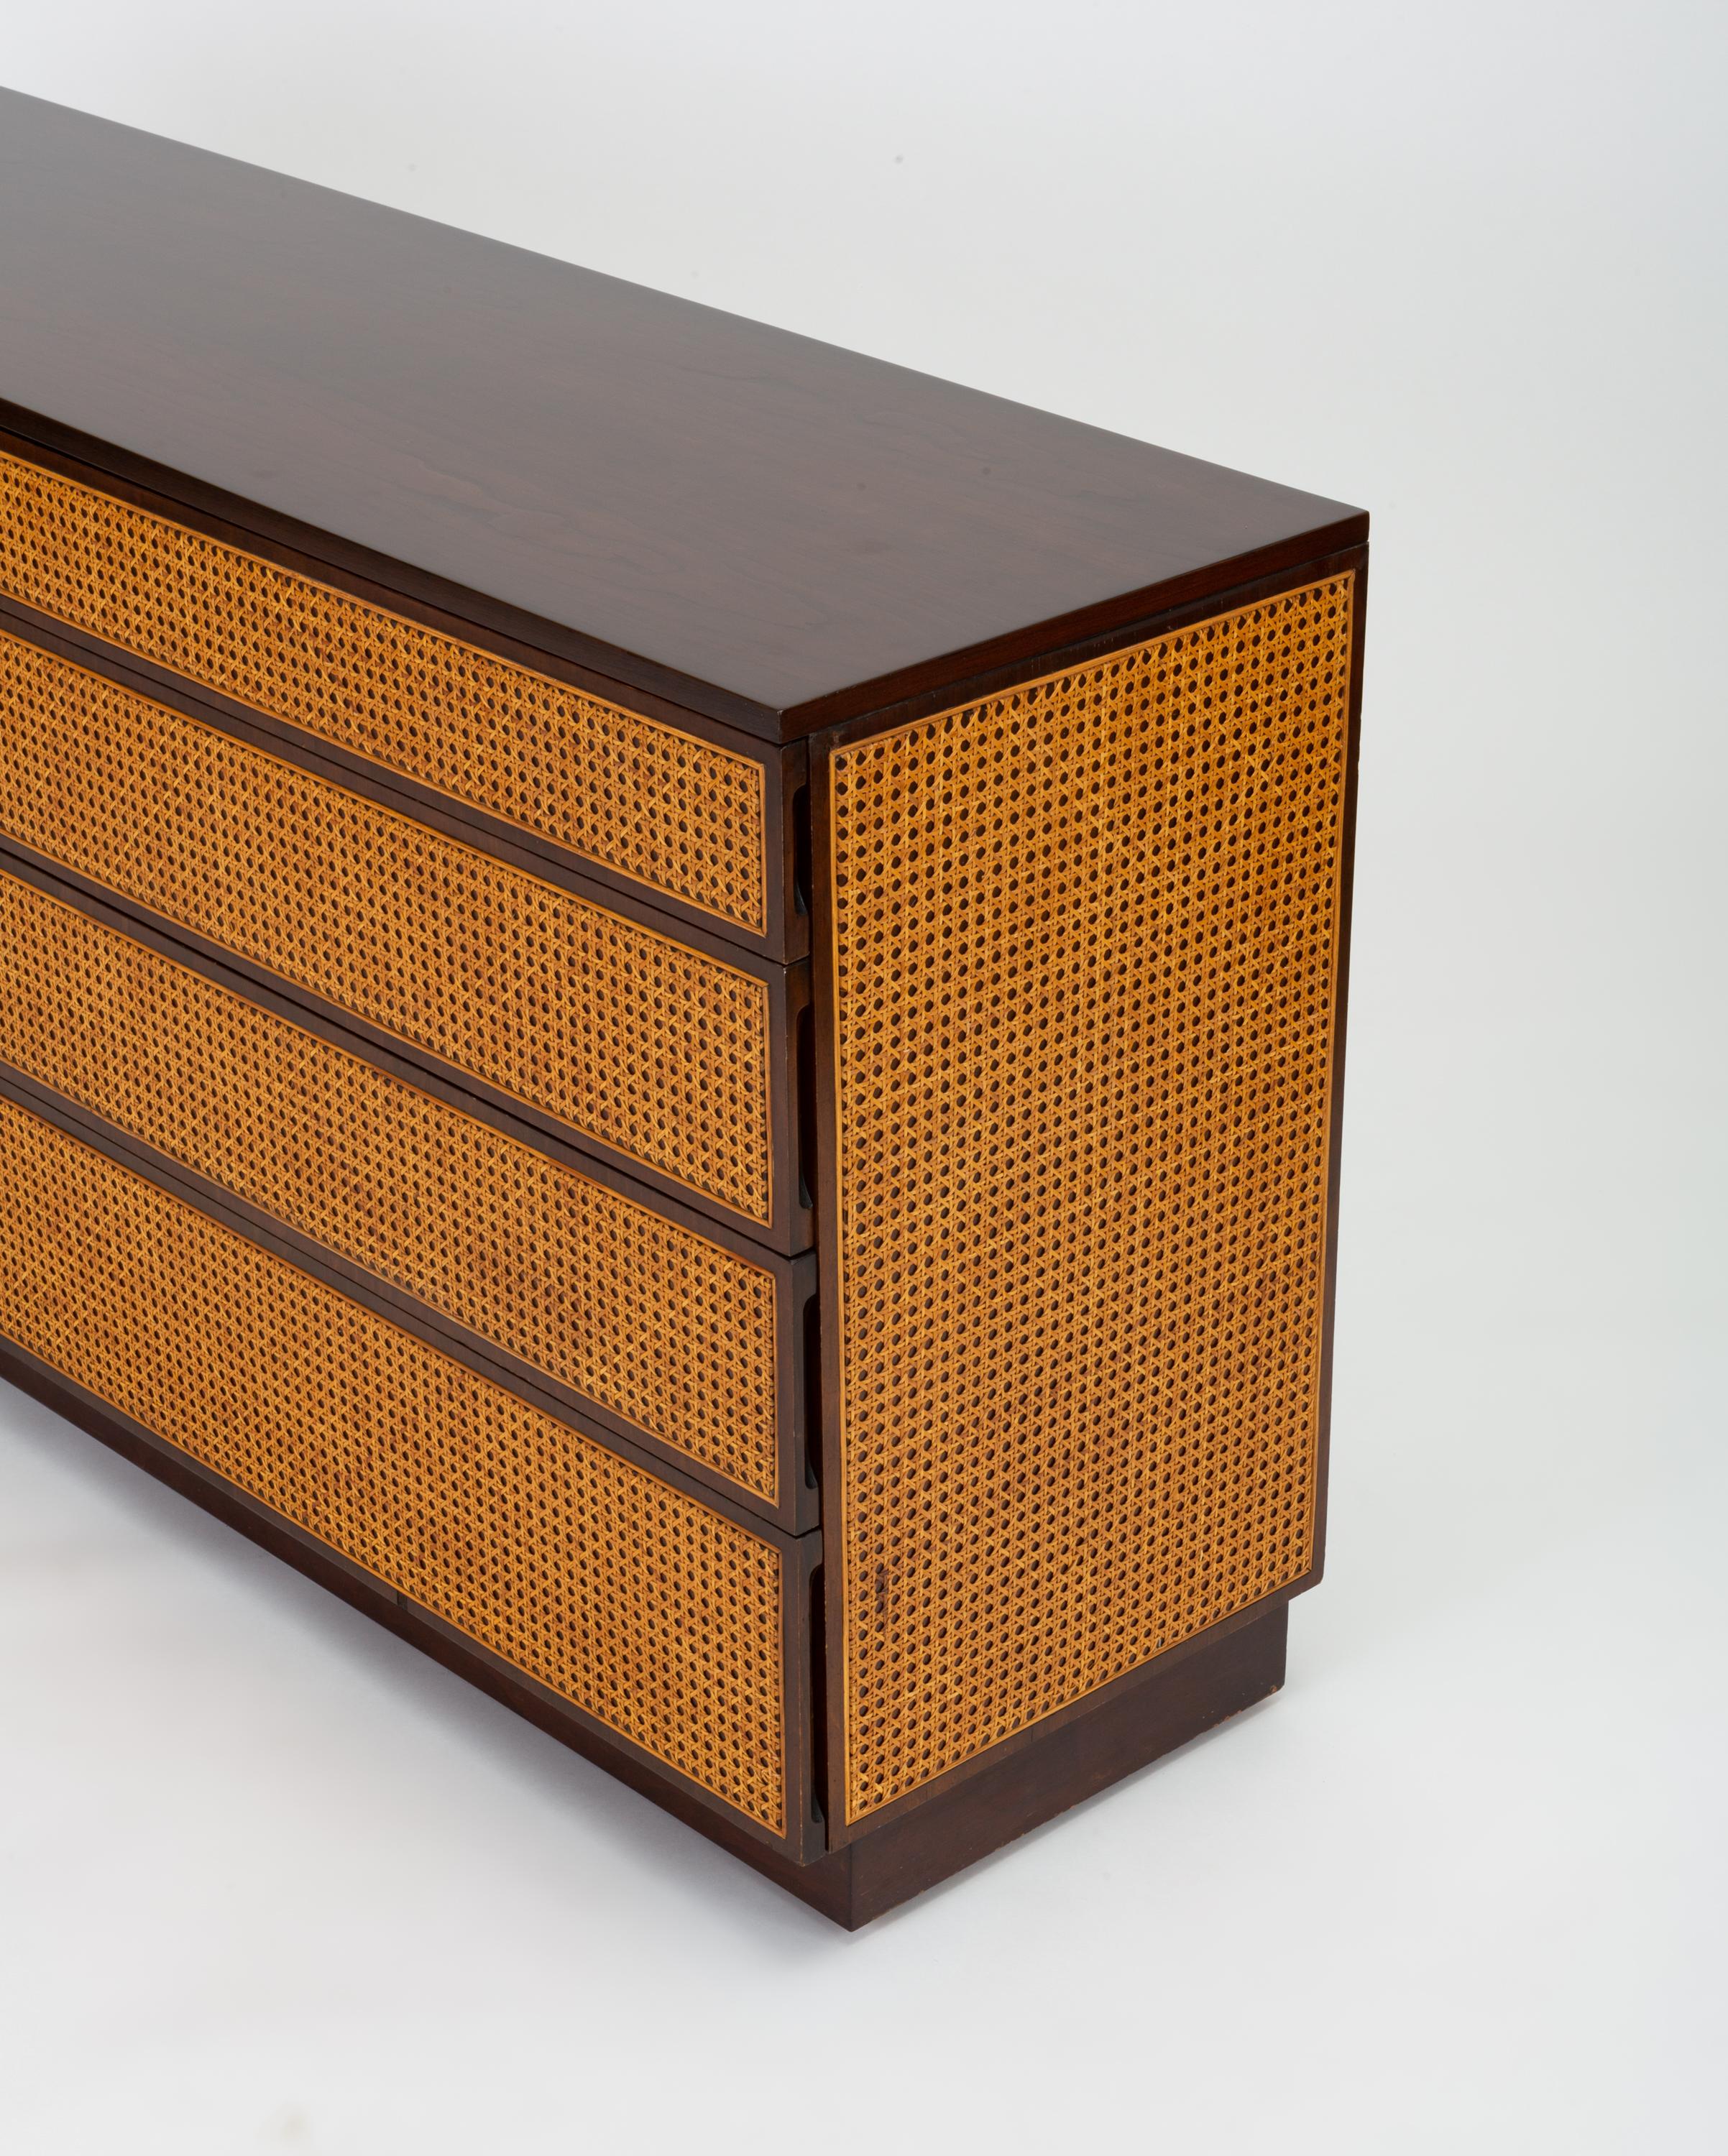 20th Century Eight Drawer Dresser with Woven Cane Paneling from Directional Custom Collection